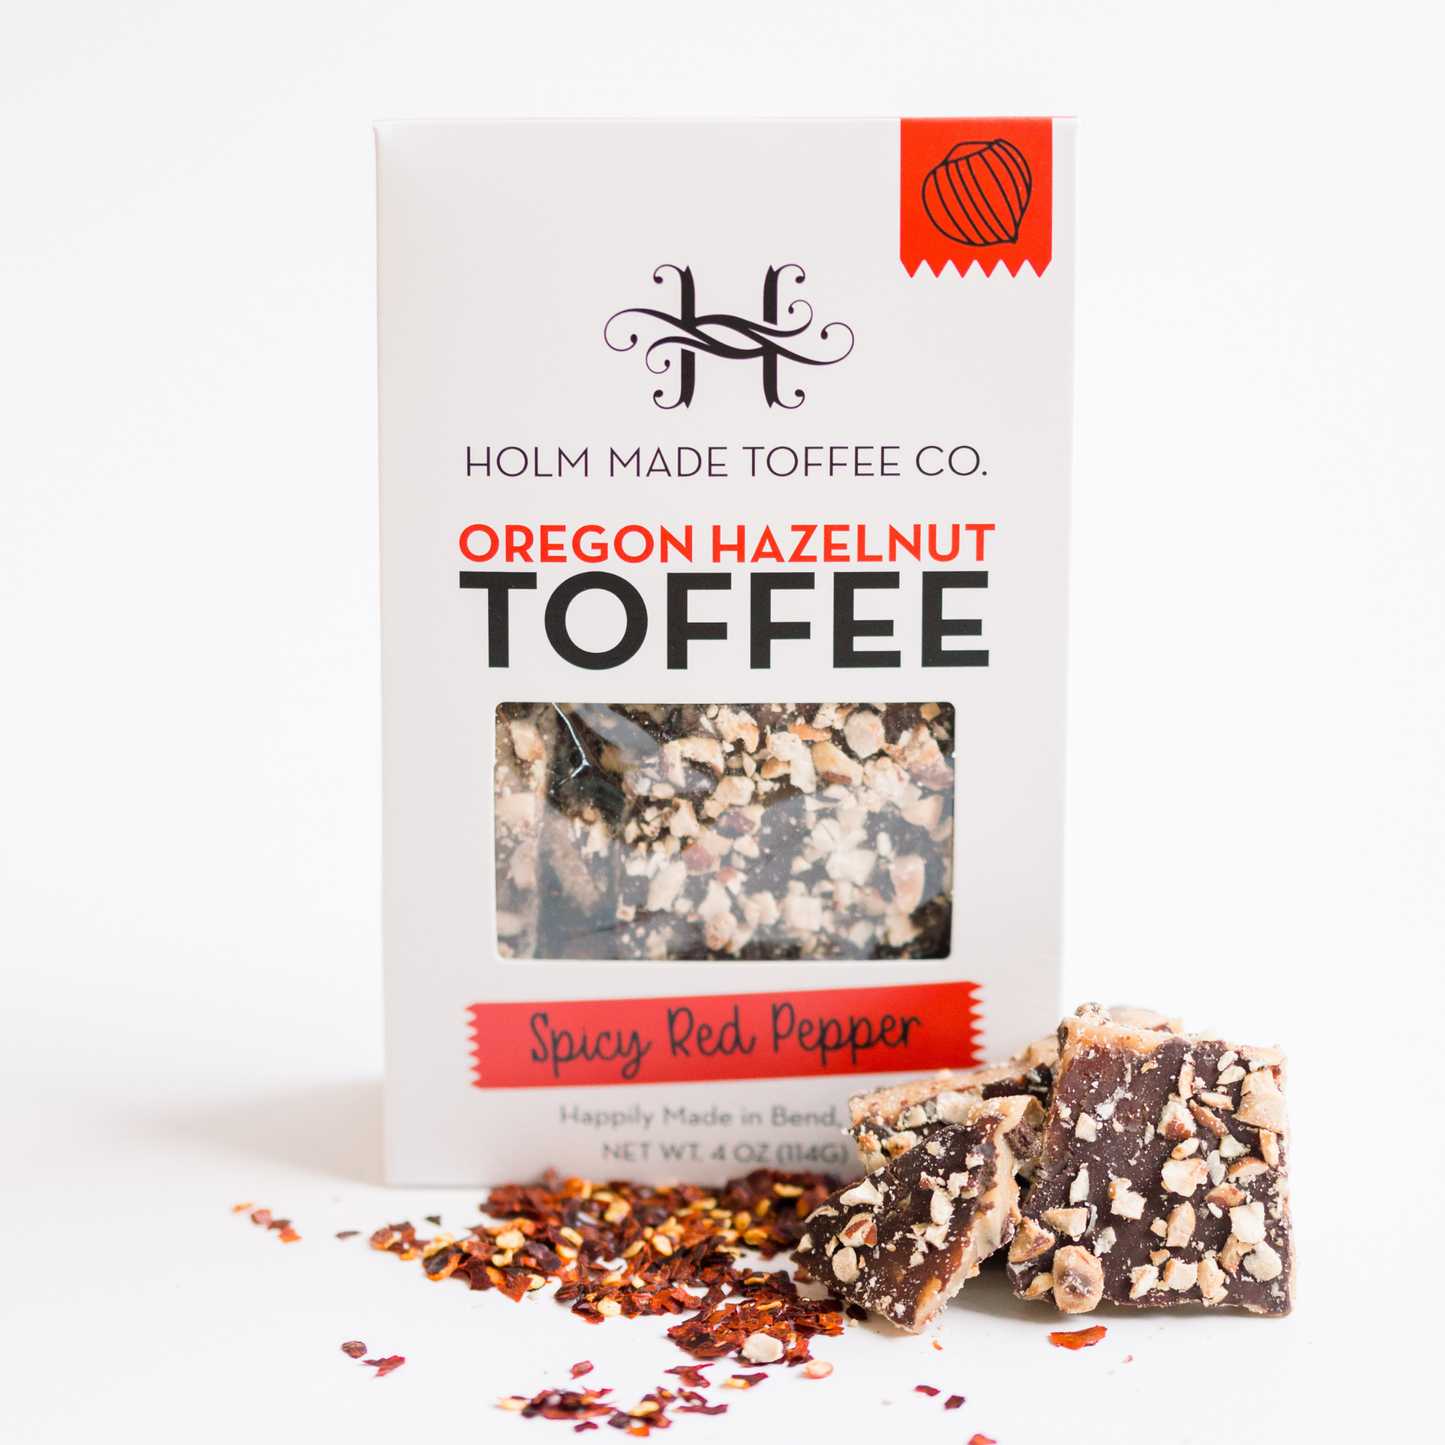 Holm Made Toffee Co. - Spicy Red Pepper - Oregon Hazelnut Toffee